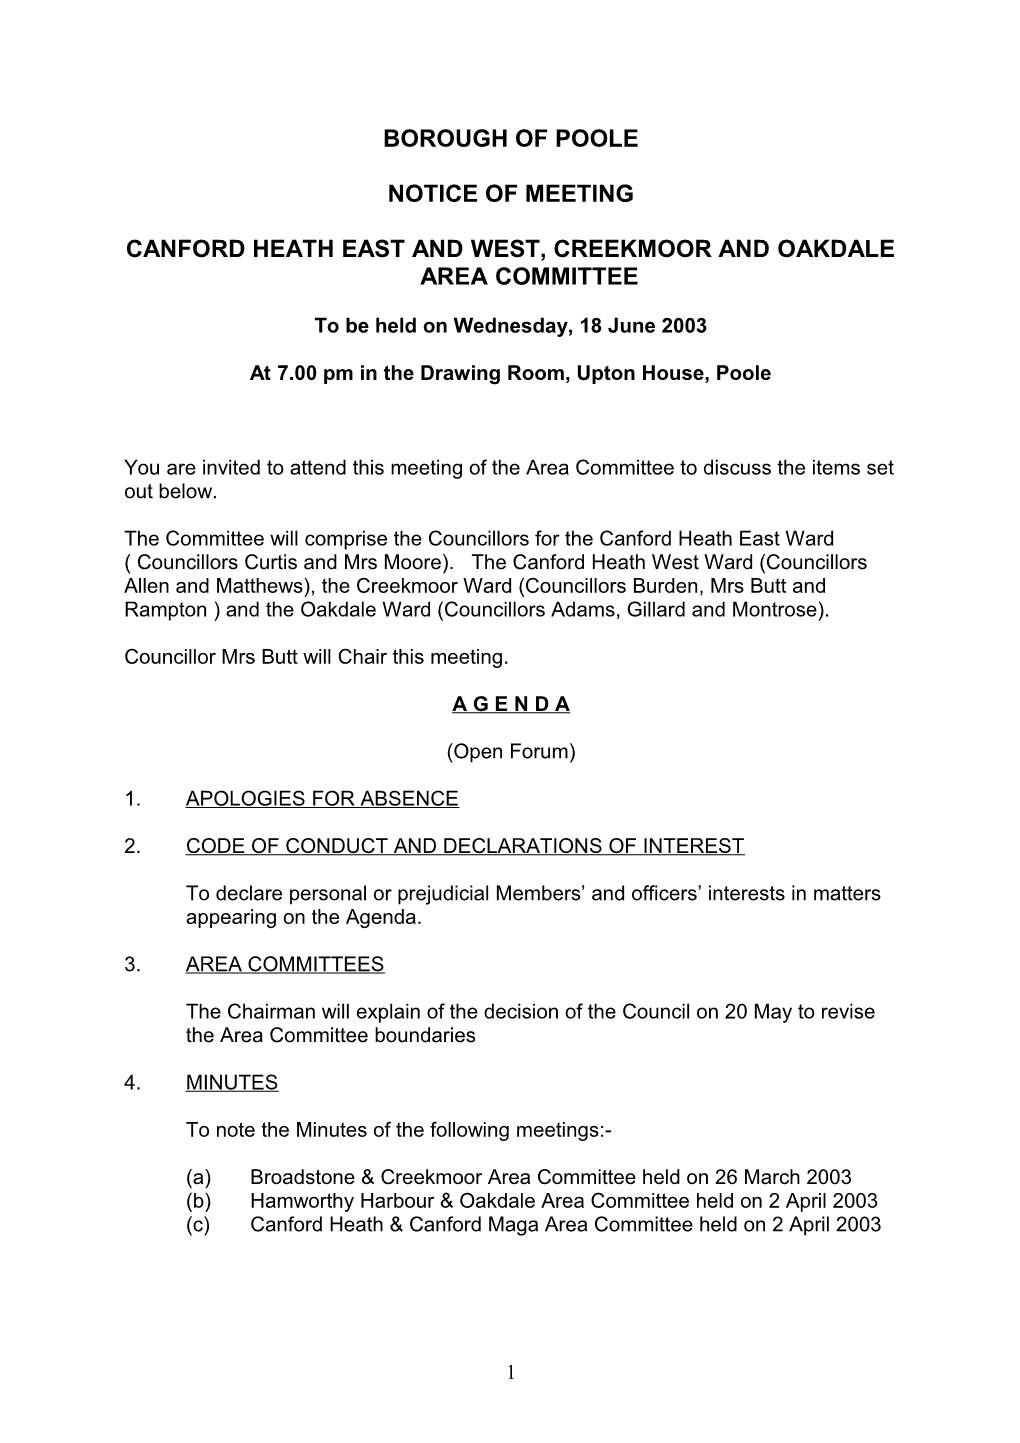 Agenda - Canford Heath East and West, Creekmoor and Oakdale Area Committee -18 June 2003